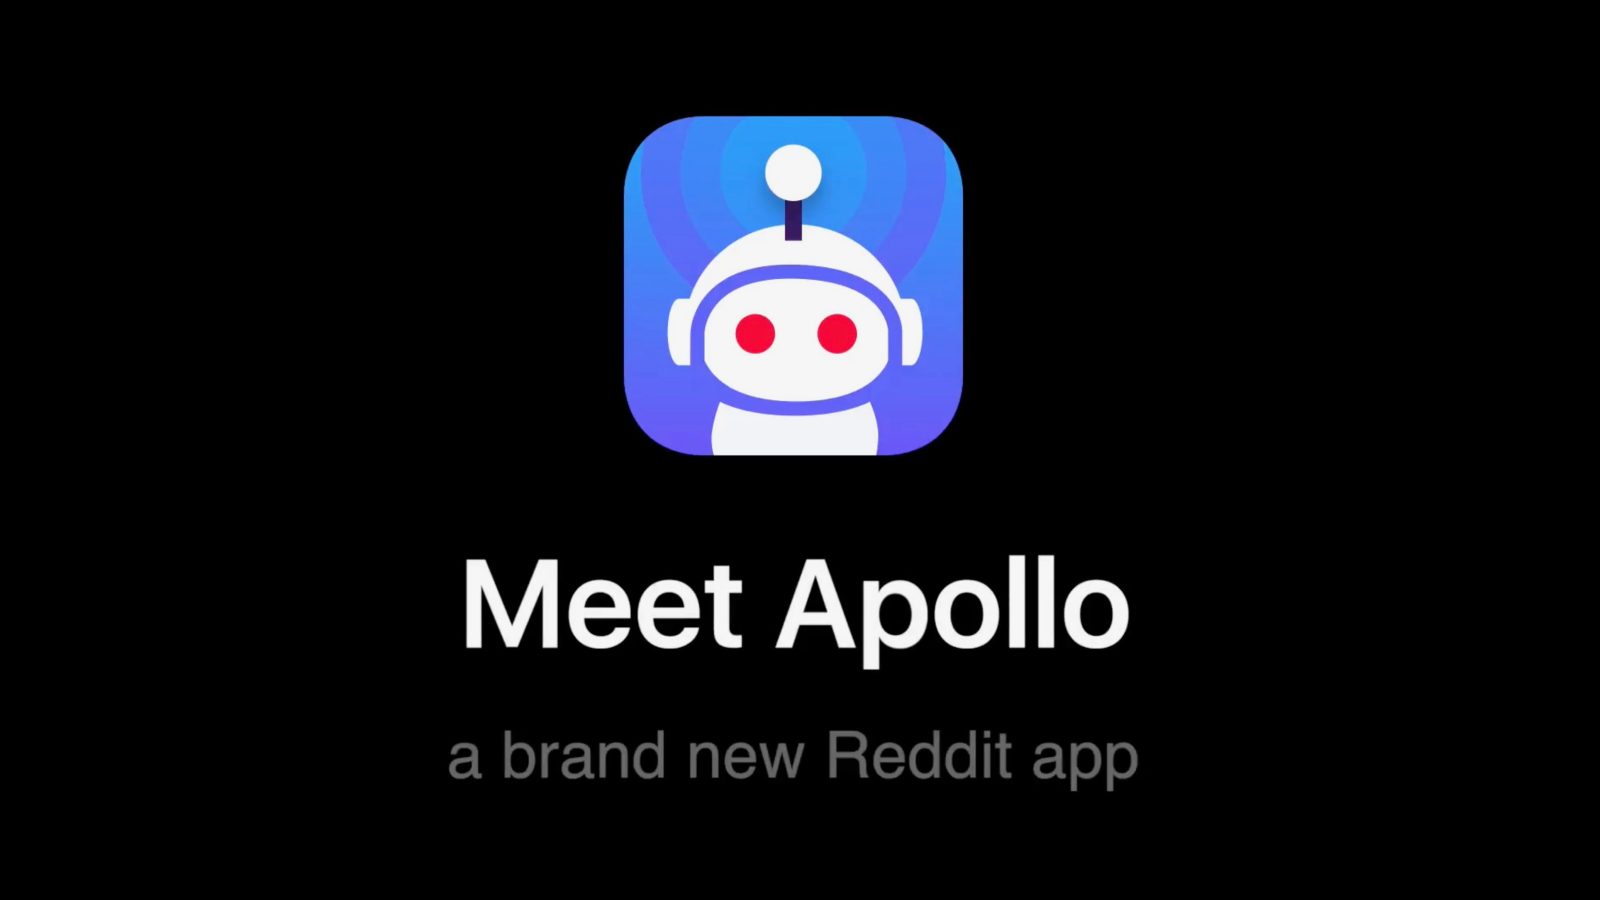 former apple employee launches be!   autiful ios focused reddit client - selfpromotion browse images about selfpromotion at instagram imgrum